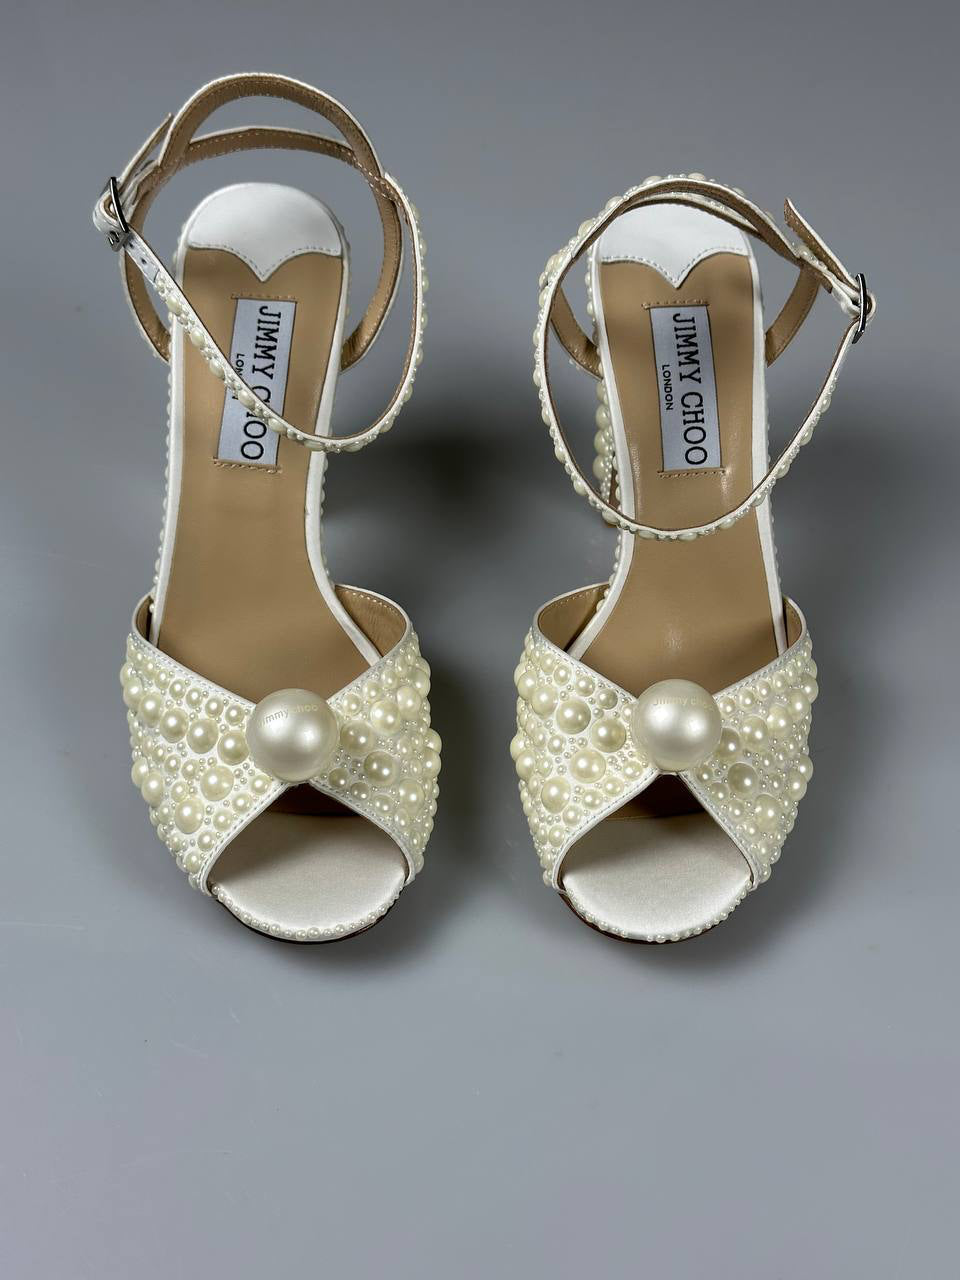 Jimmy Choo Sacaria 100 Satin Sandals with All-Over Pearl Embellishment